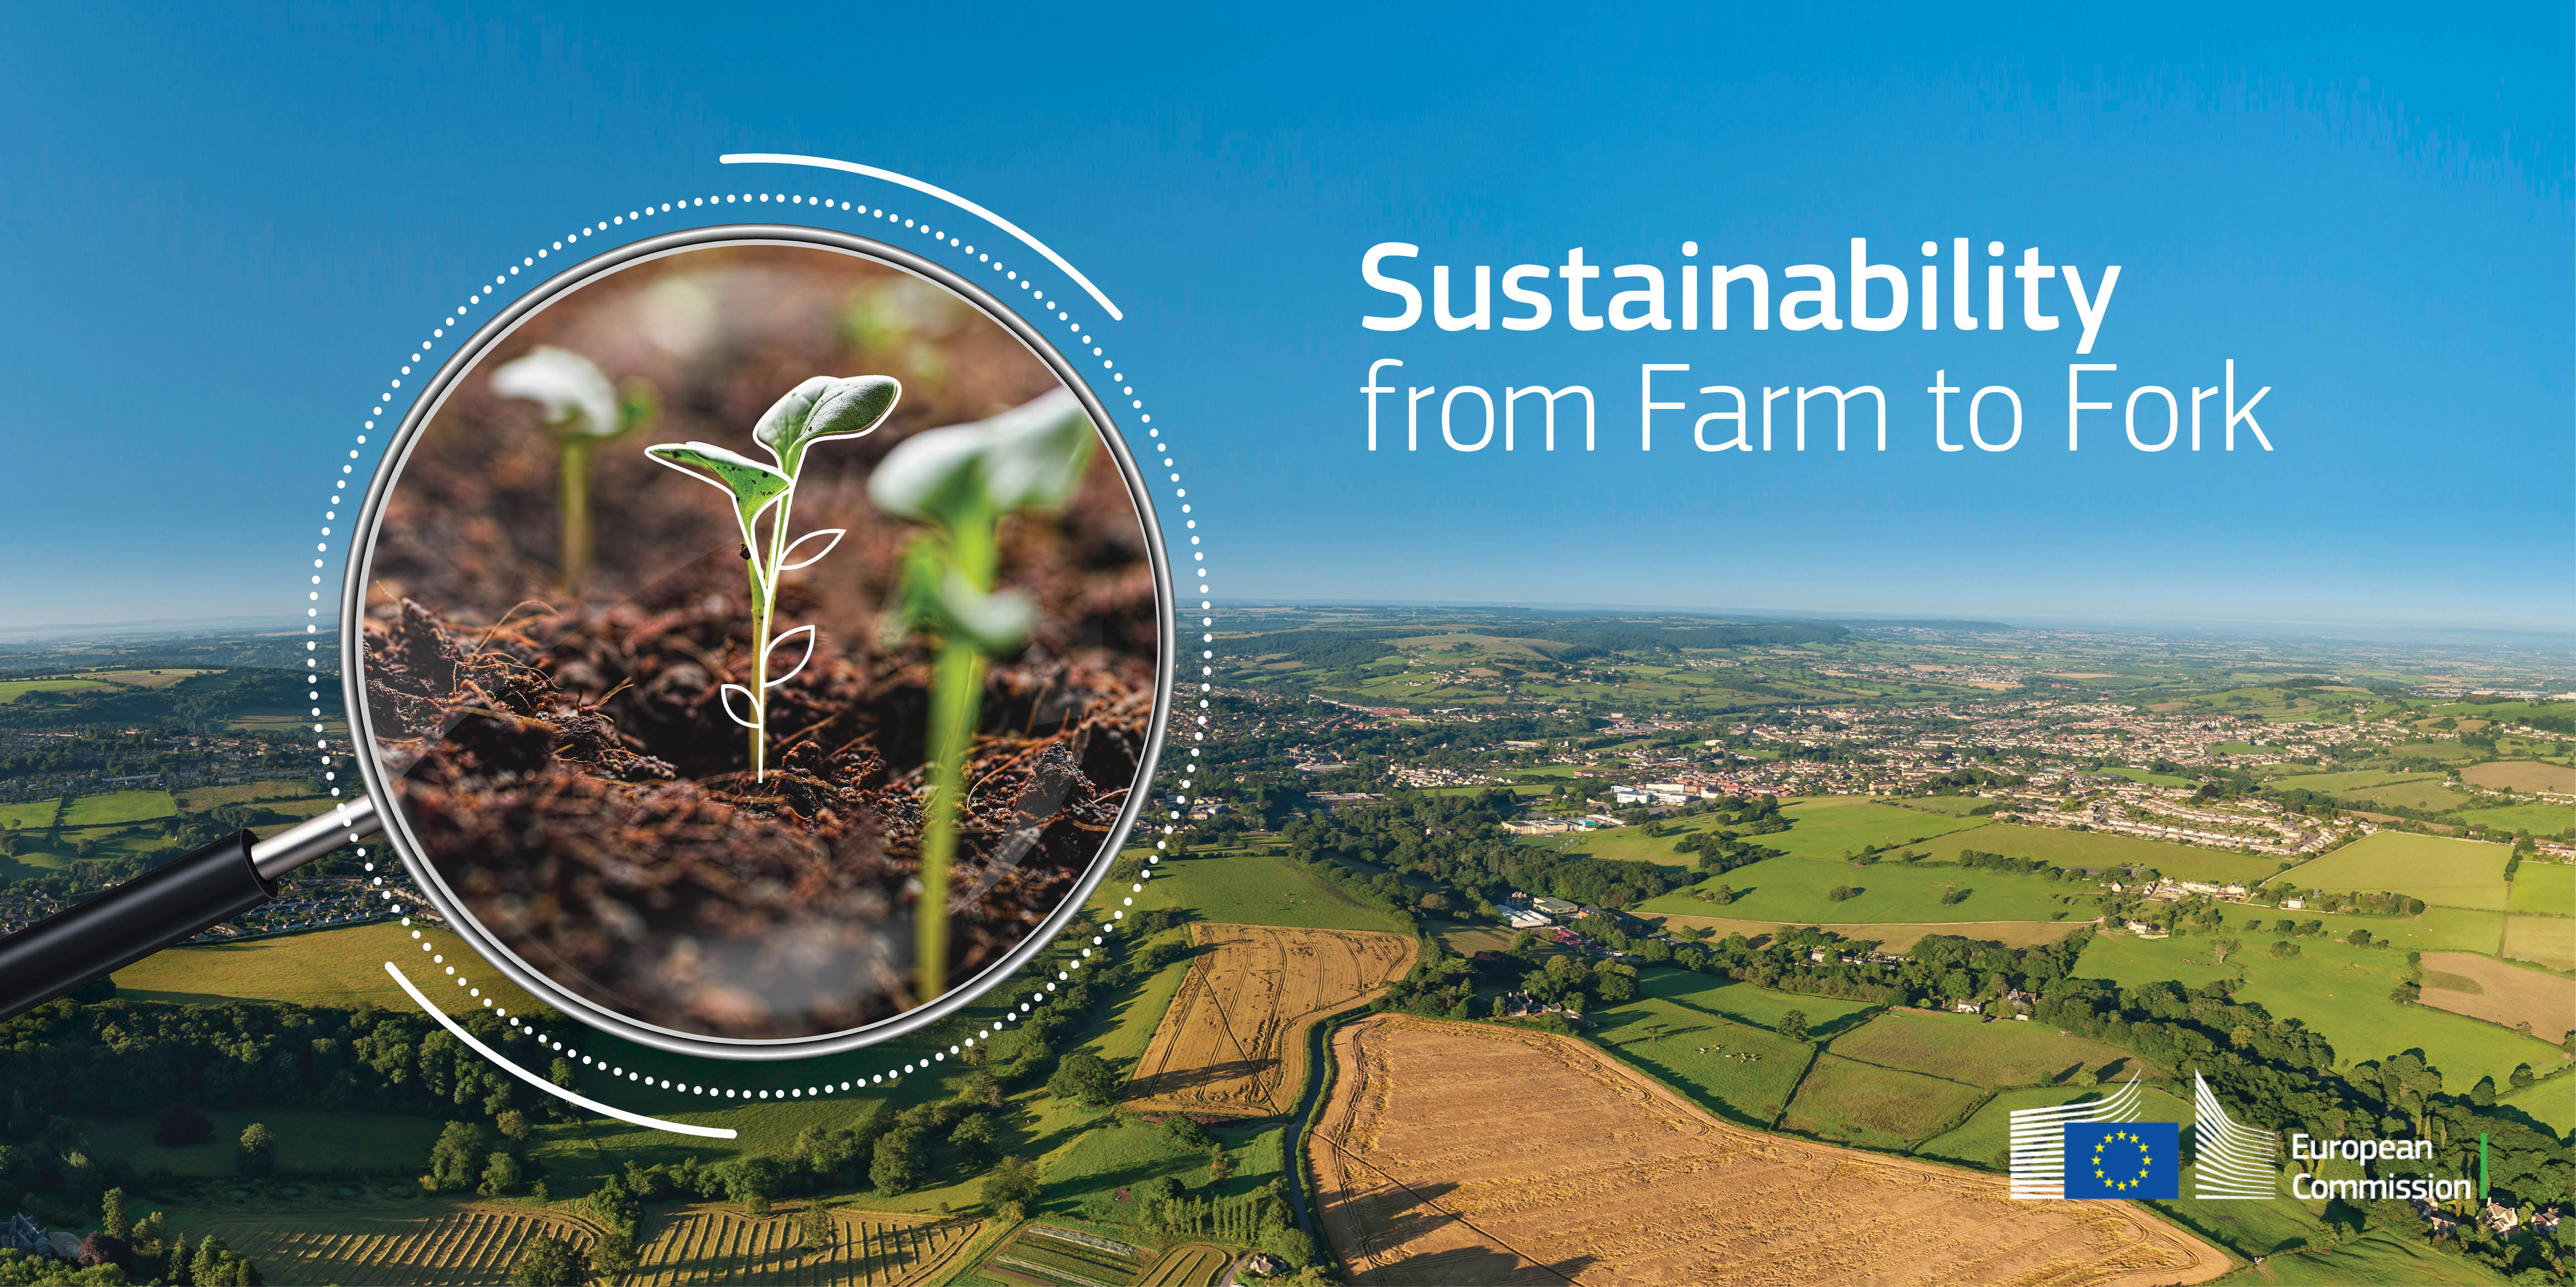 EU agricultural outlook conference 2019 - sustainability from farm to fork